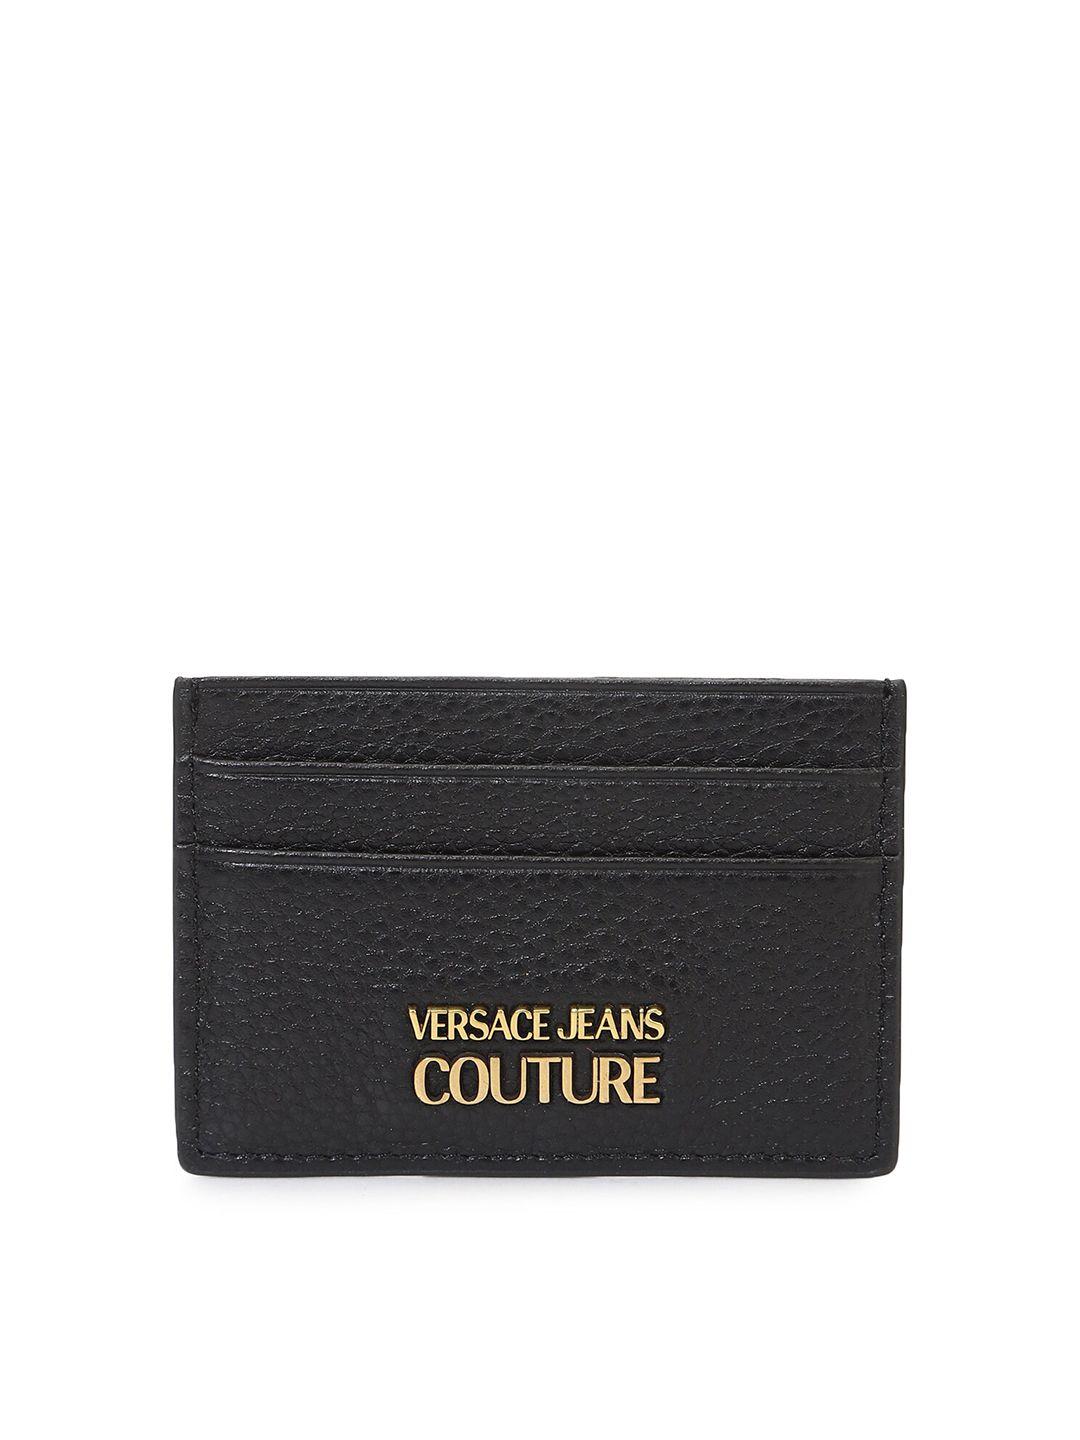 versace jeans couture men black & gold-toned leather card holder